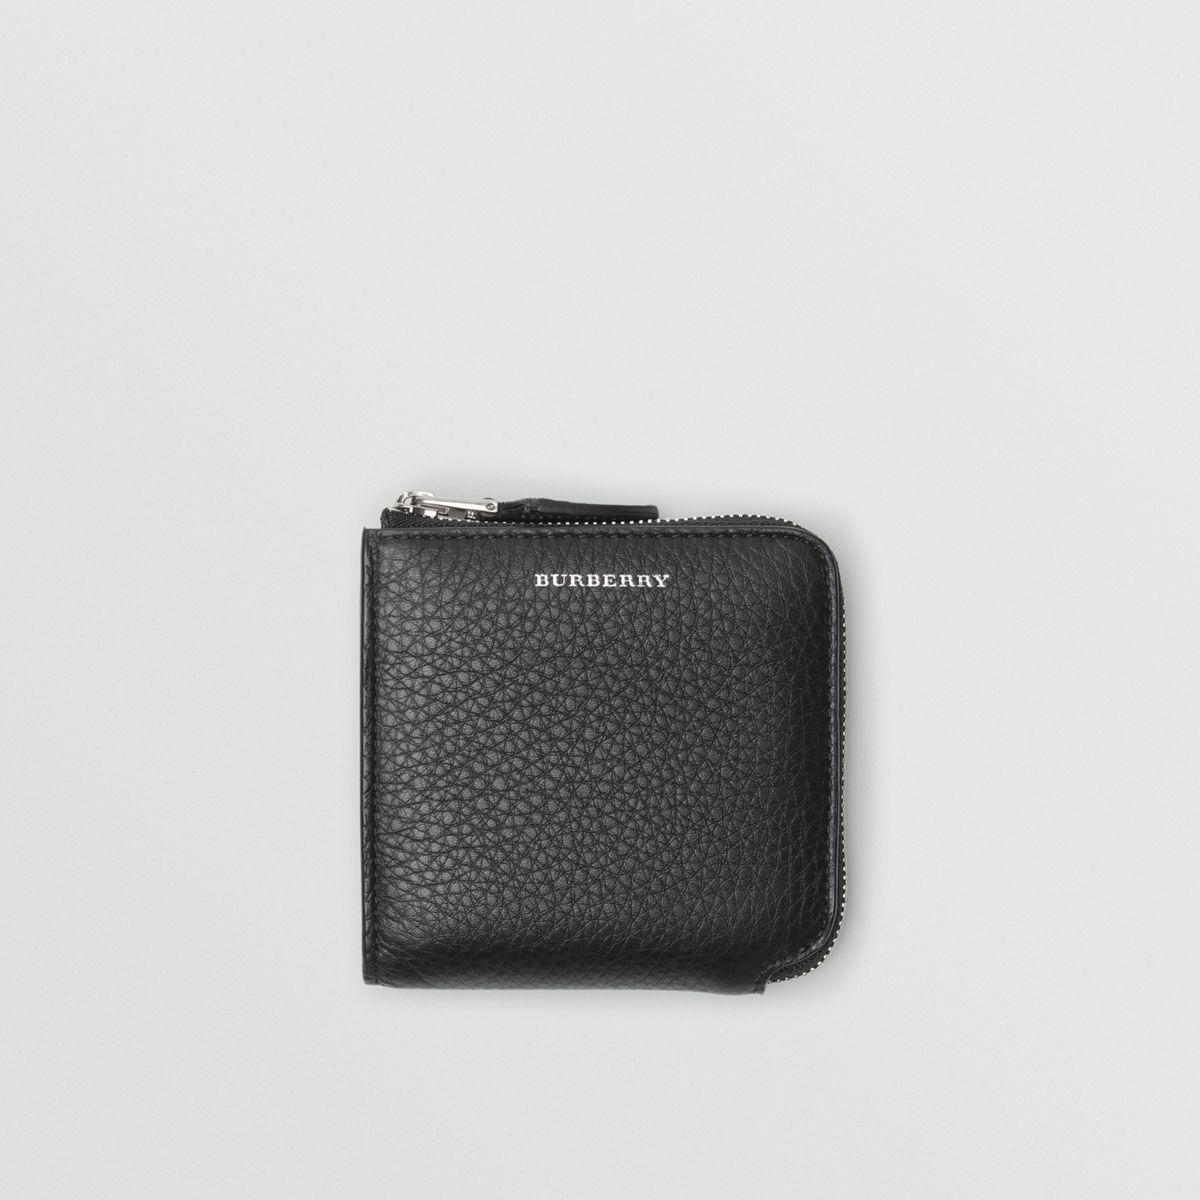 Burberry Grainy Leather Square Ziparound Wallet in Black | Lyst